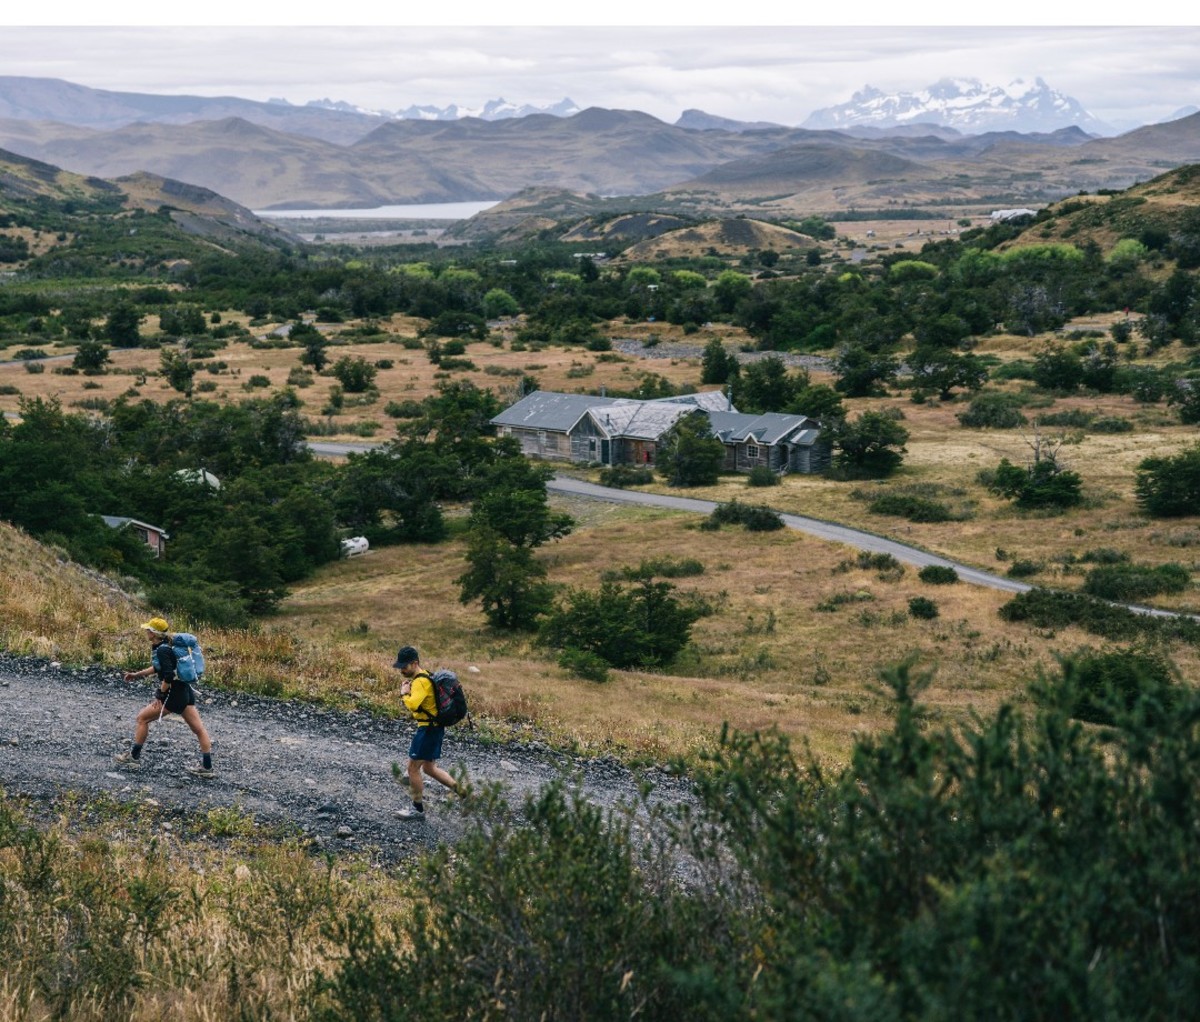 Two hikers set off from the trailhead in Patagonia's Torres del Paine National Park